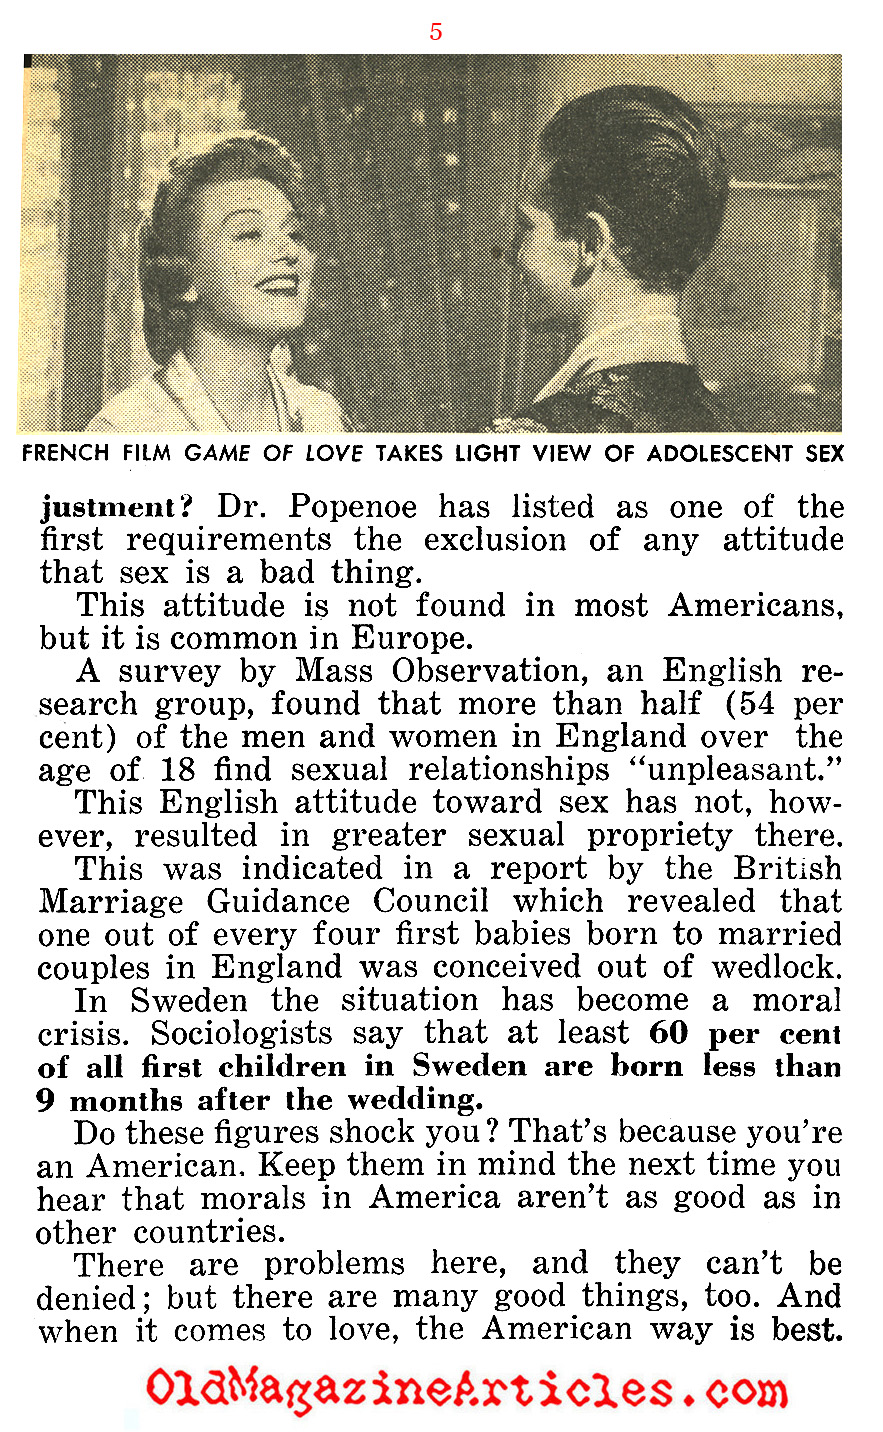 American Love is Better (People Today Magazine, 1955)